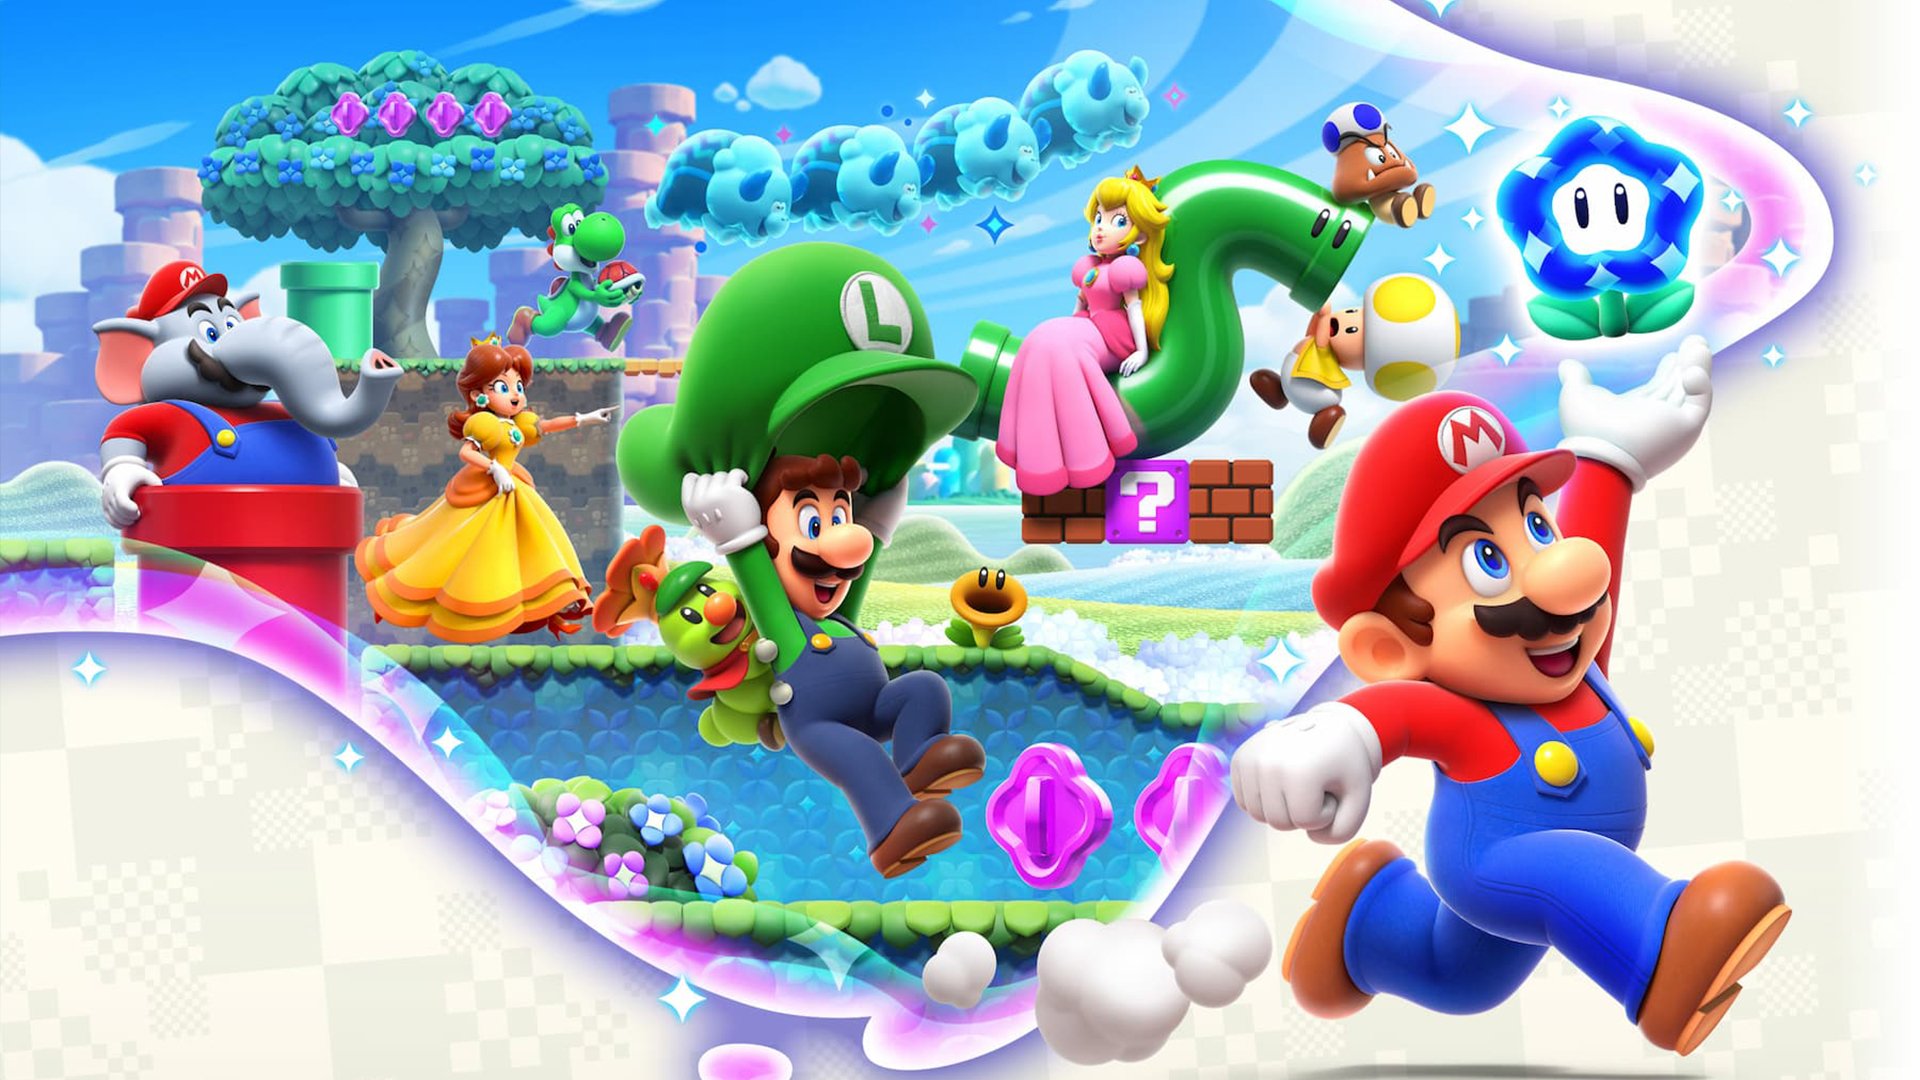 Super Mario Bros. Wonder is the newest 2D title from Nintendo's